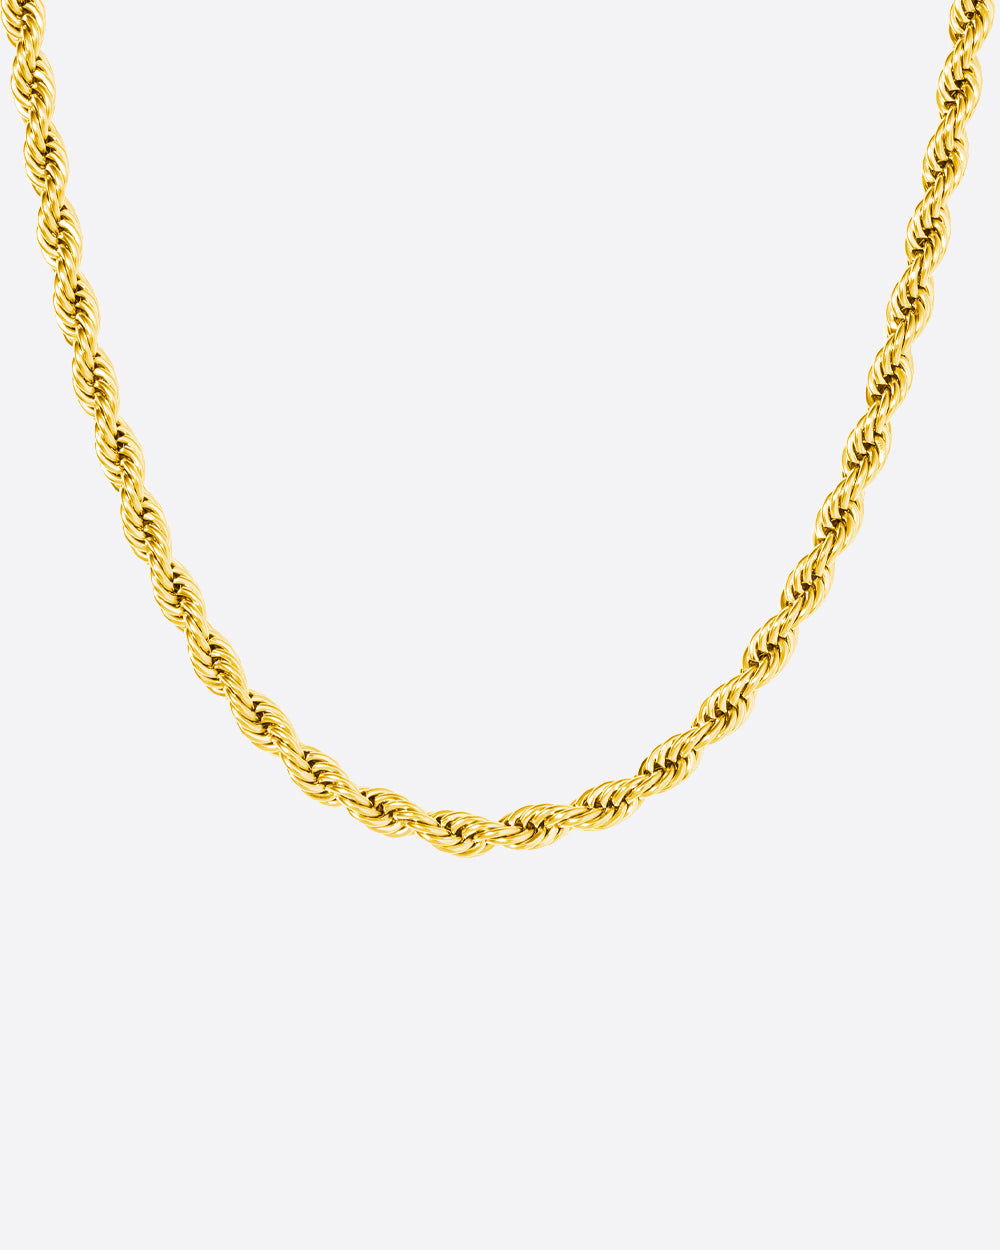 CLEAN ROPE. - 6MM 18K GOLD